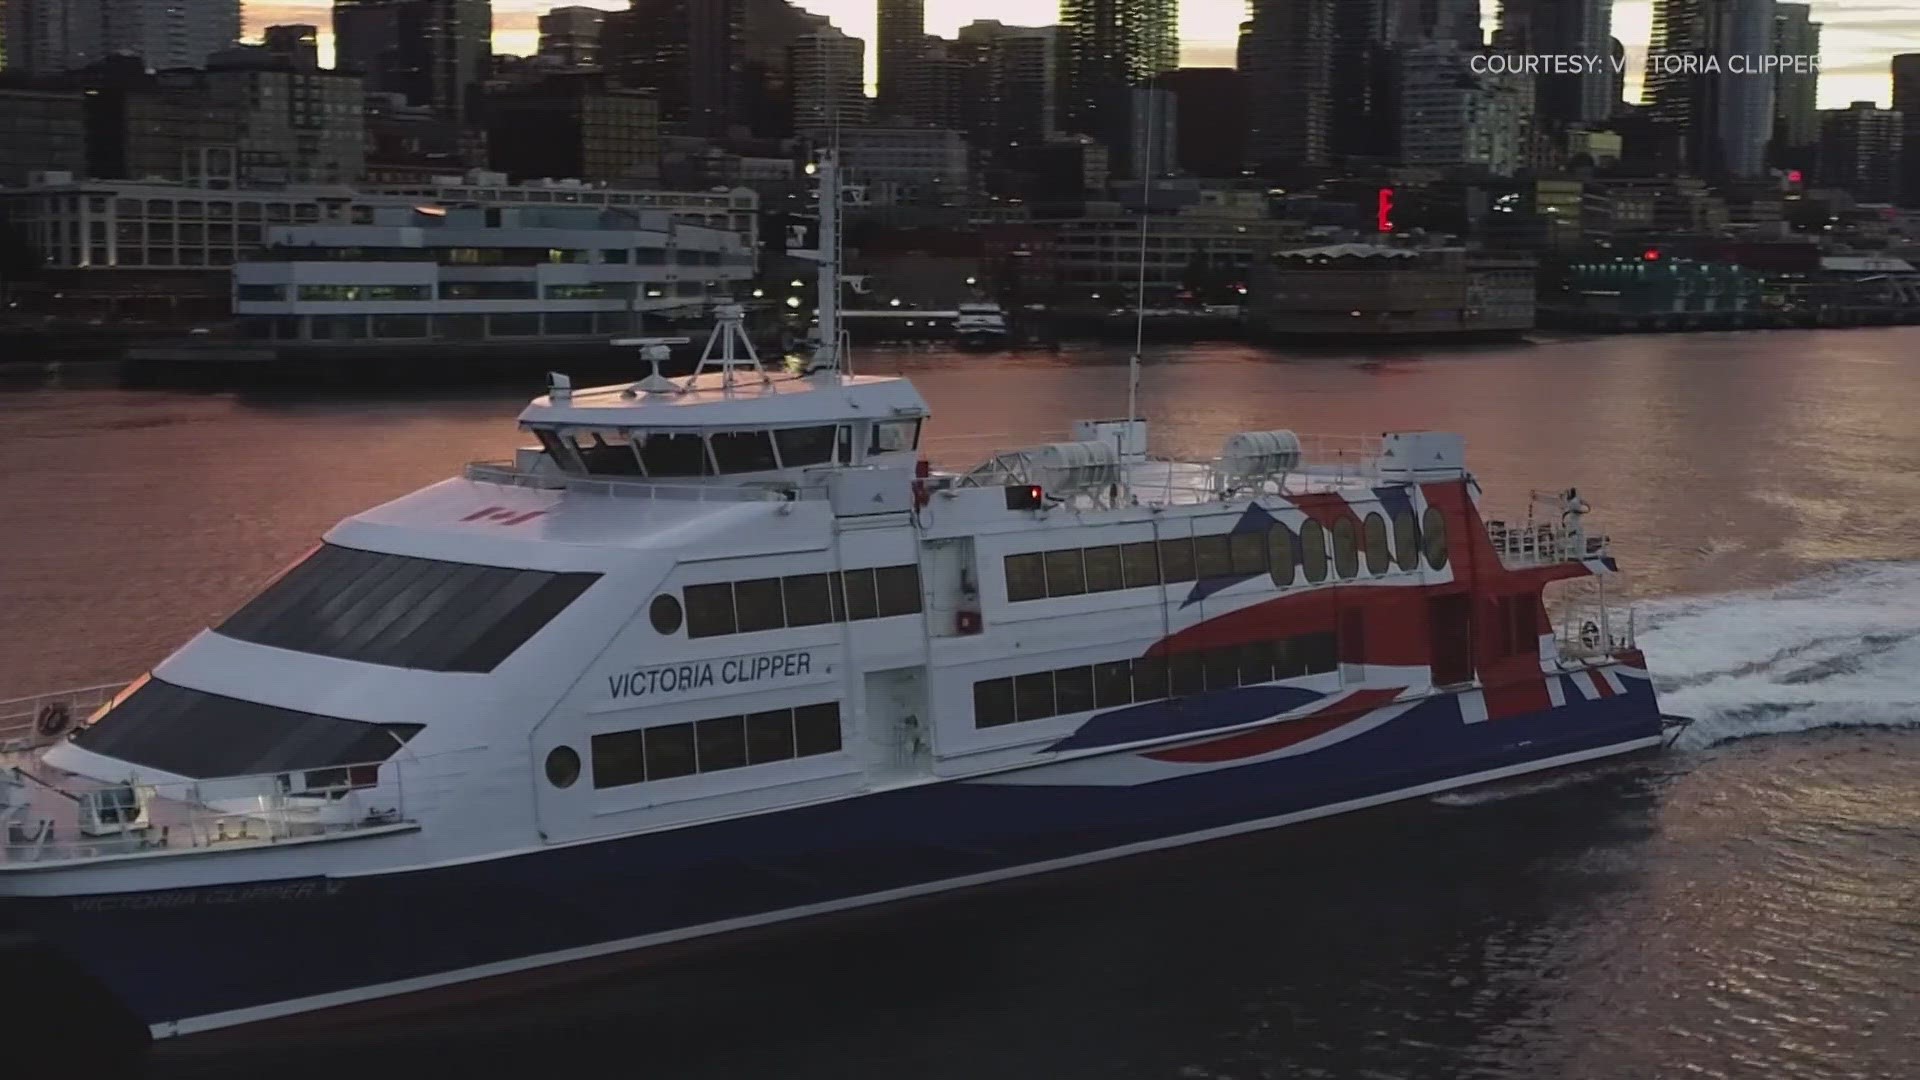 Labor Day travel plans to Victoria, British Columbia could be disrupted if the ferry workers' union doesn't come to an agreement with the Clipper.